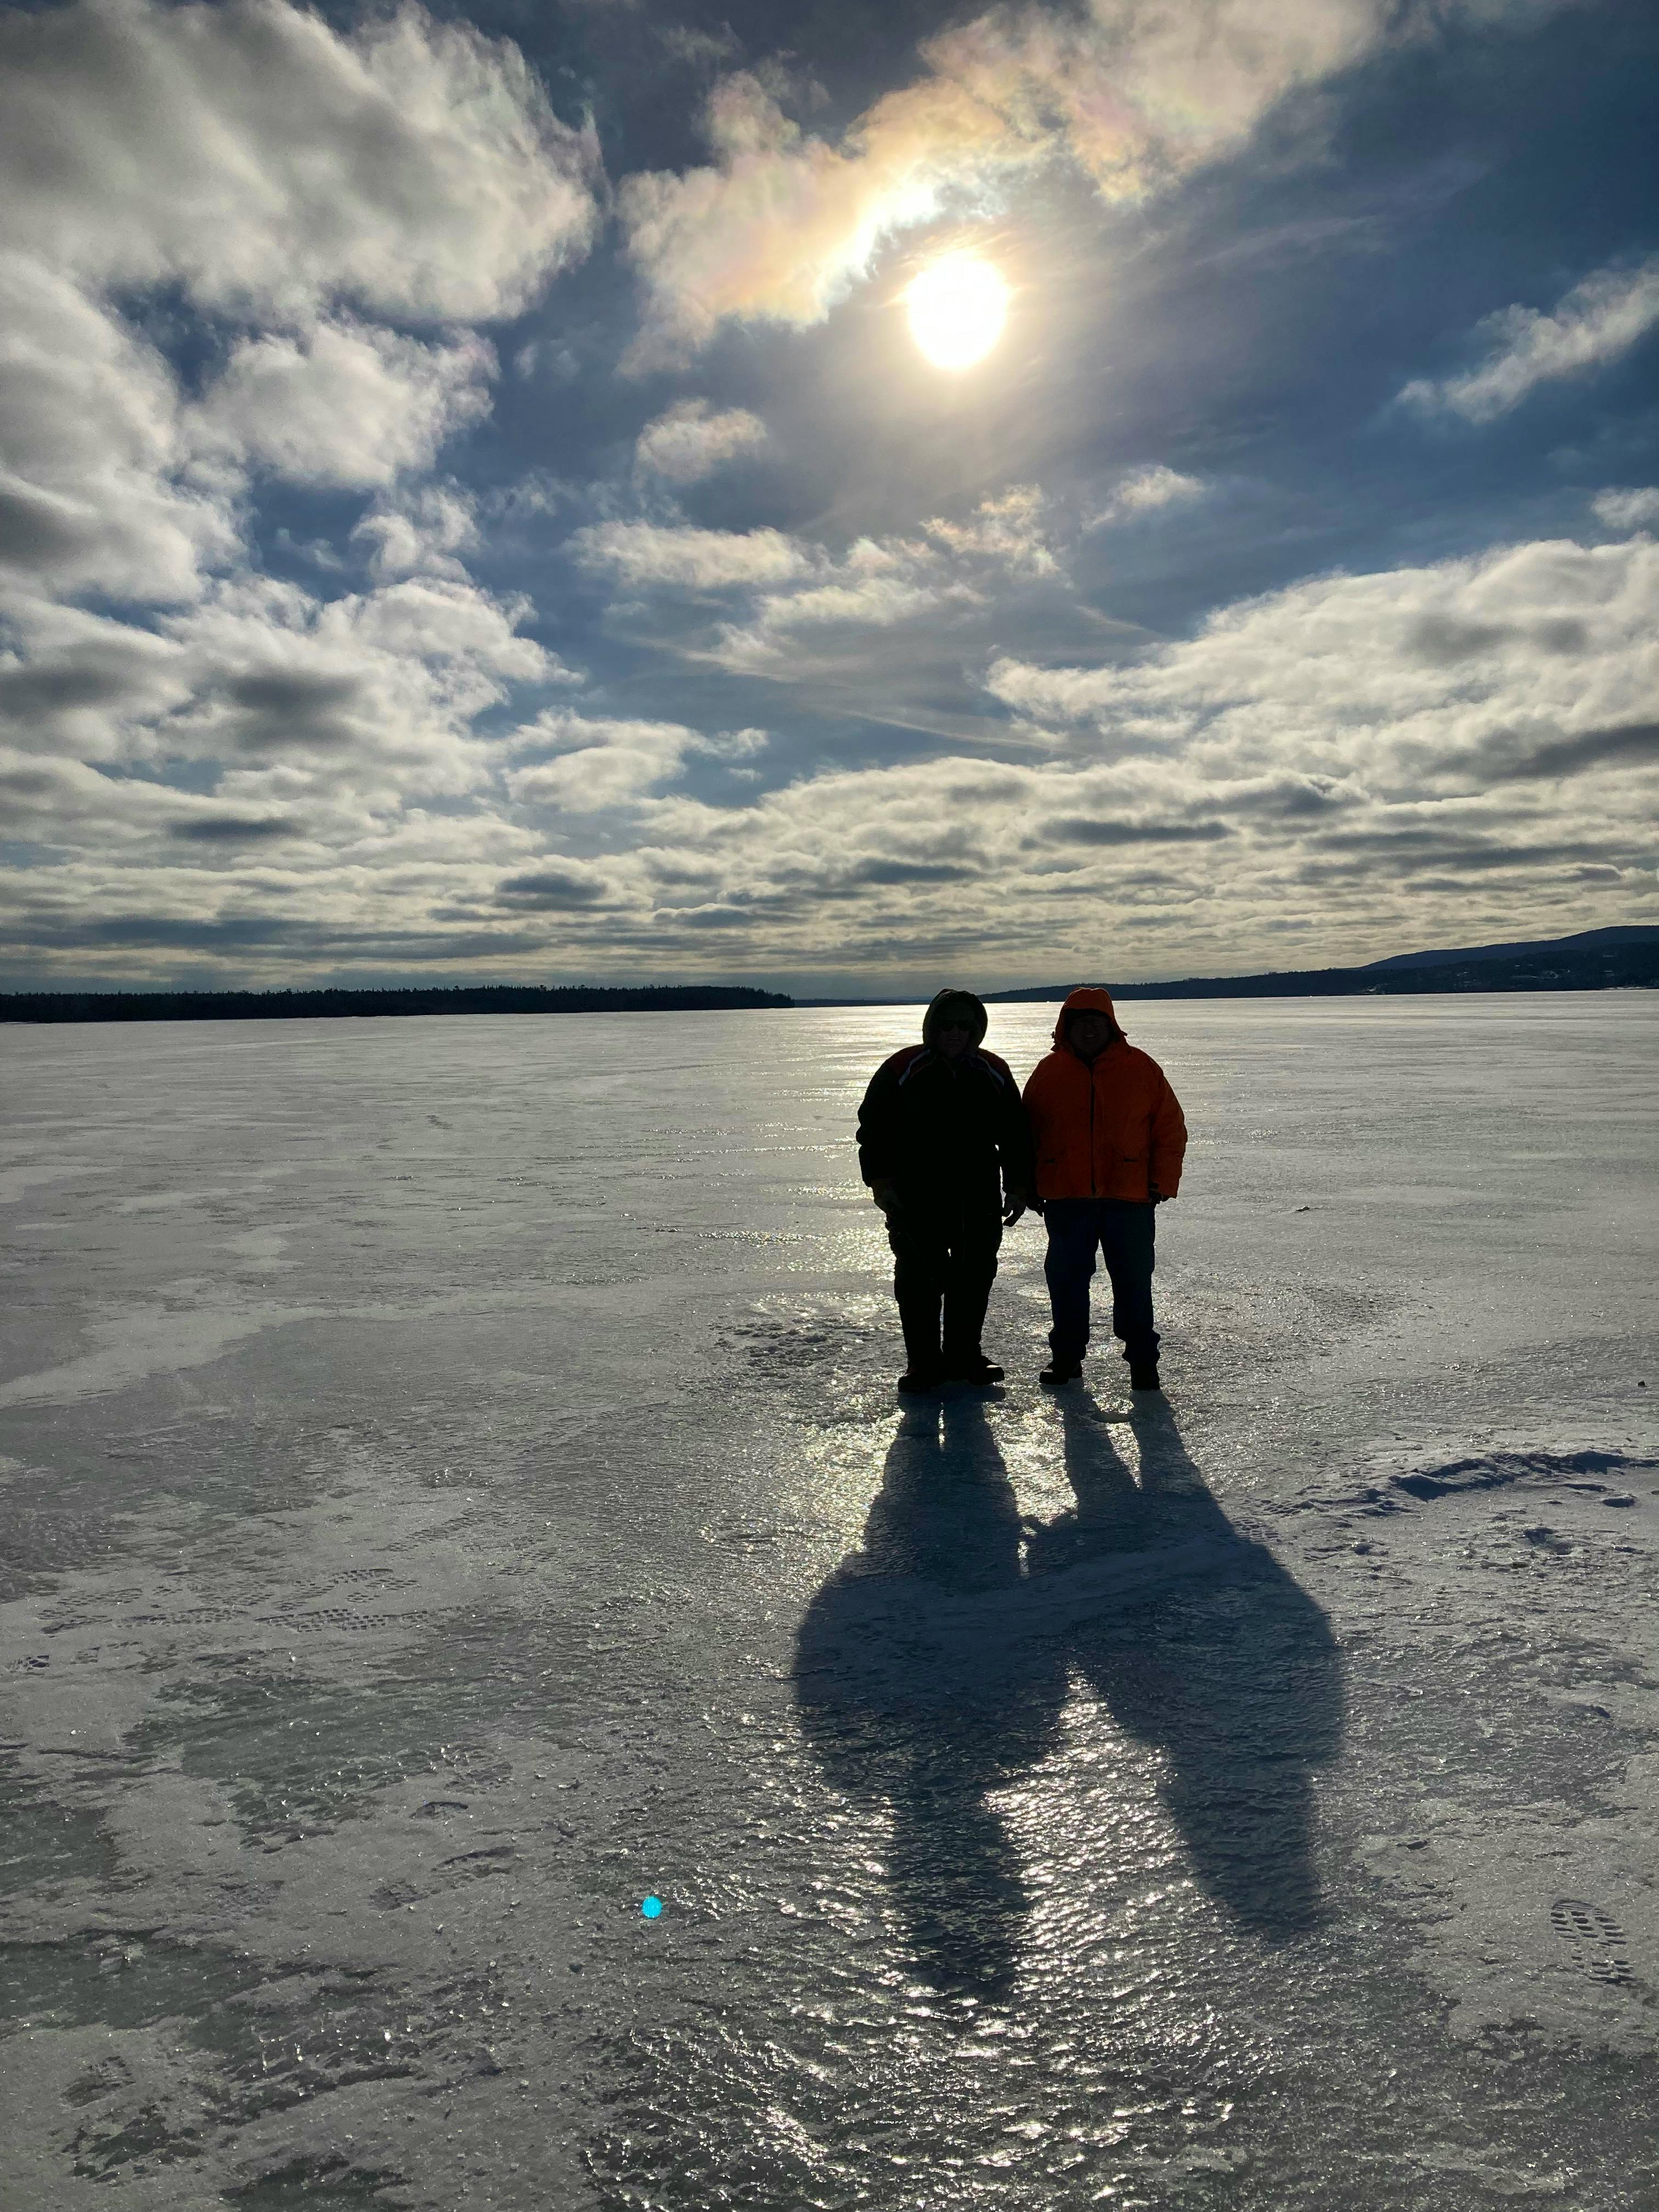 Looking at this photo has me reaching for a jacket. Darryl Murrant spent Groundhog Day with some friends in -20 C weather on the Bras d’Or Lakes near Baddeck, N.S.  He says there were many people ice fishing and enjoying the outdoors on the lake. With the long shadows cast by his friends, he predicts six more weeks of winter ahead. Not the furry prognosticator we are used to at this time of year, but we’ll make an exception. Thank you for this, Darryl.